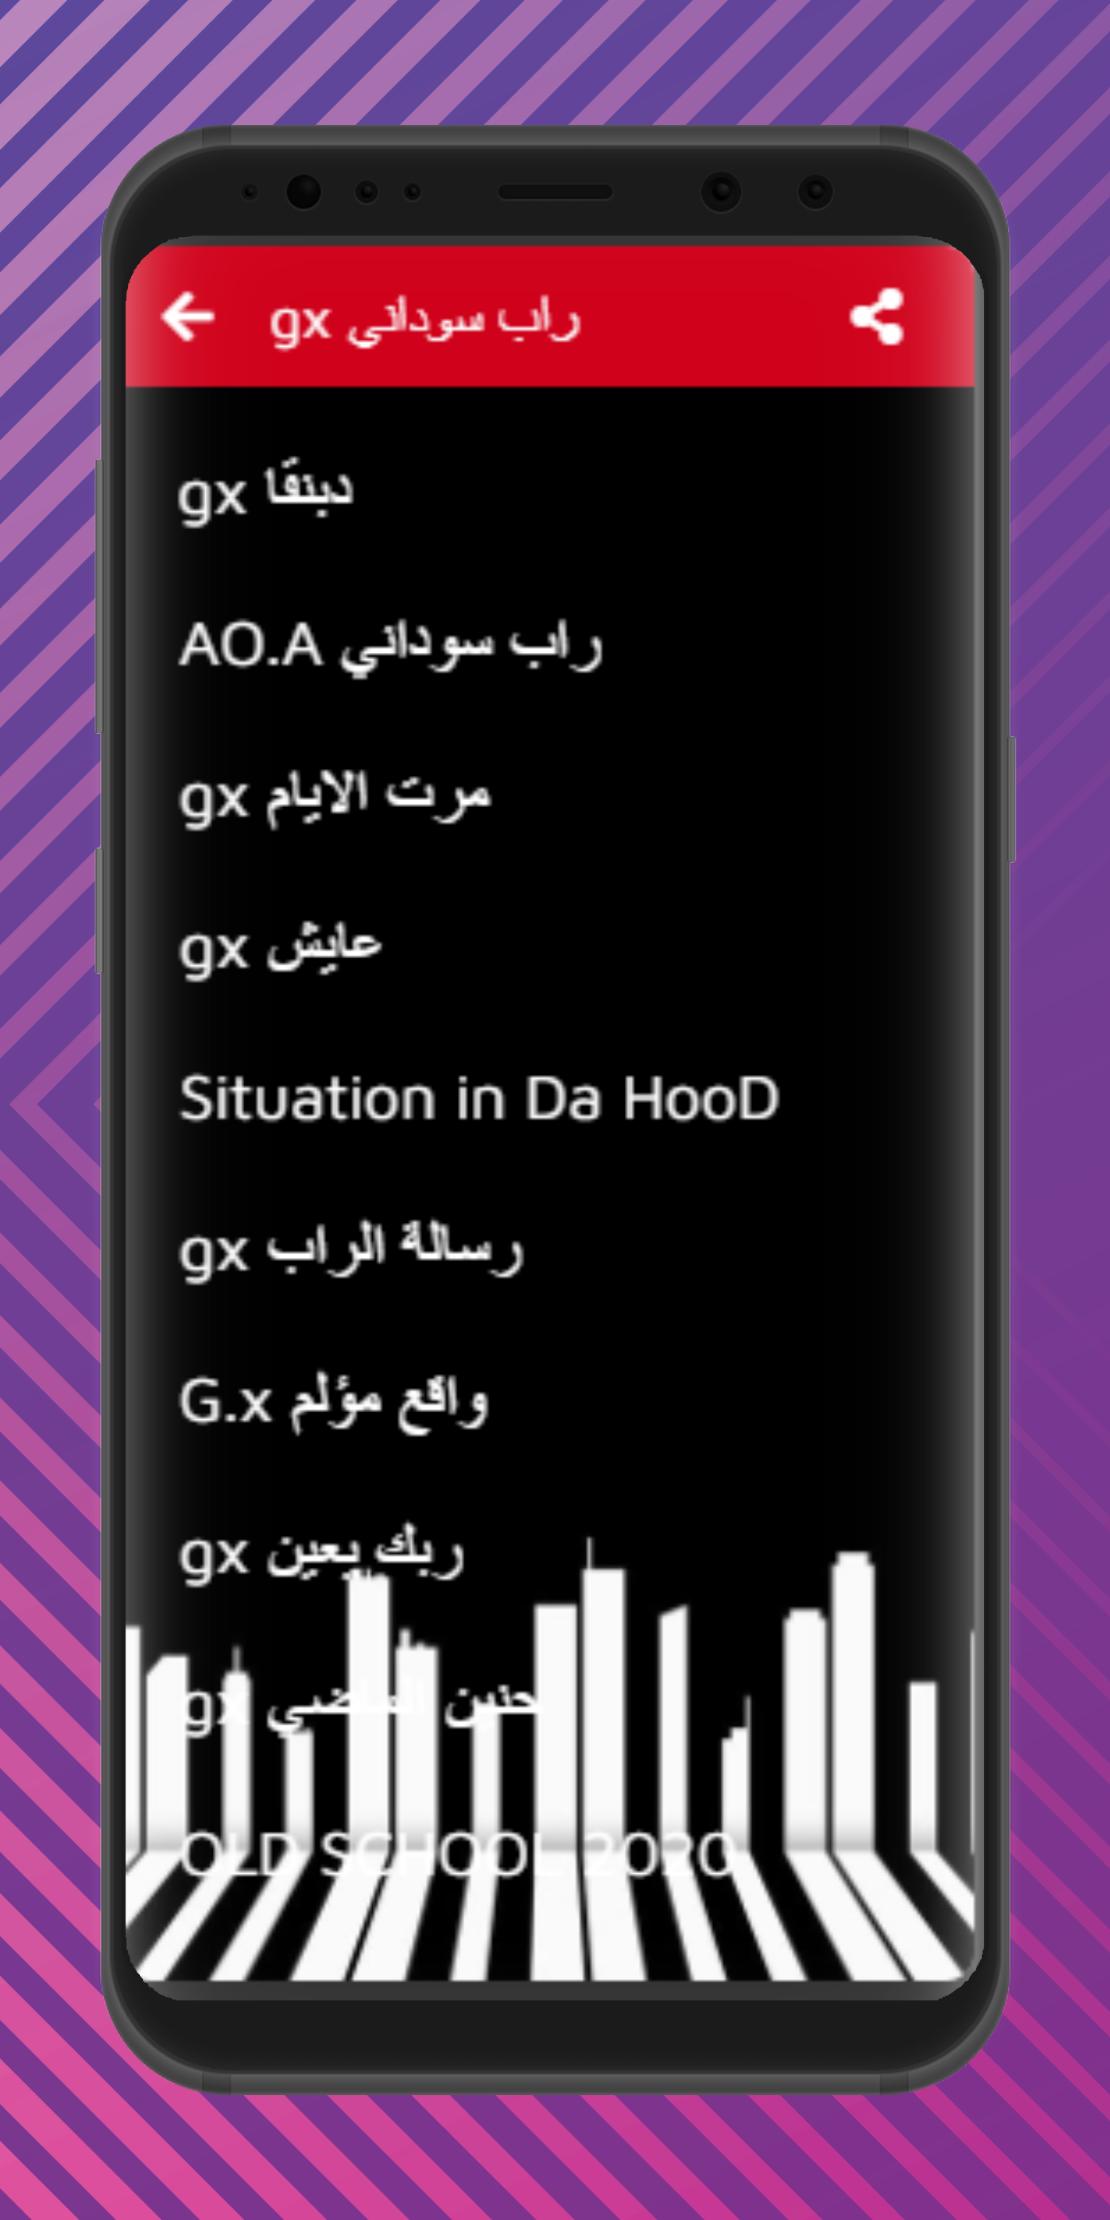 gx راب سوداني for Android - APK Download